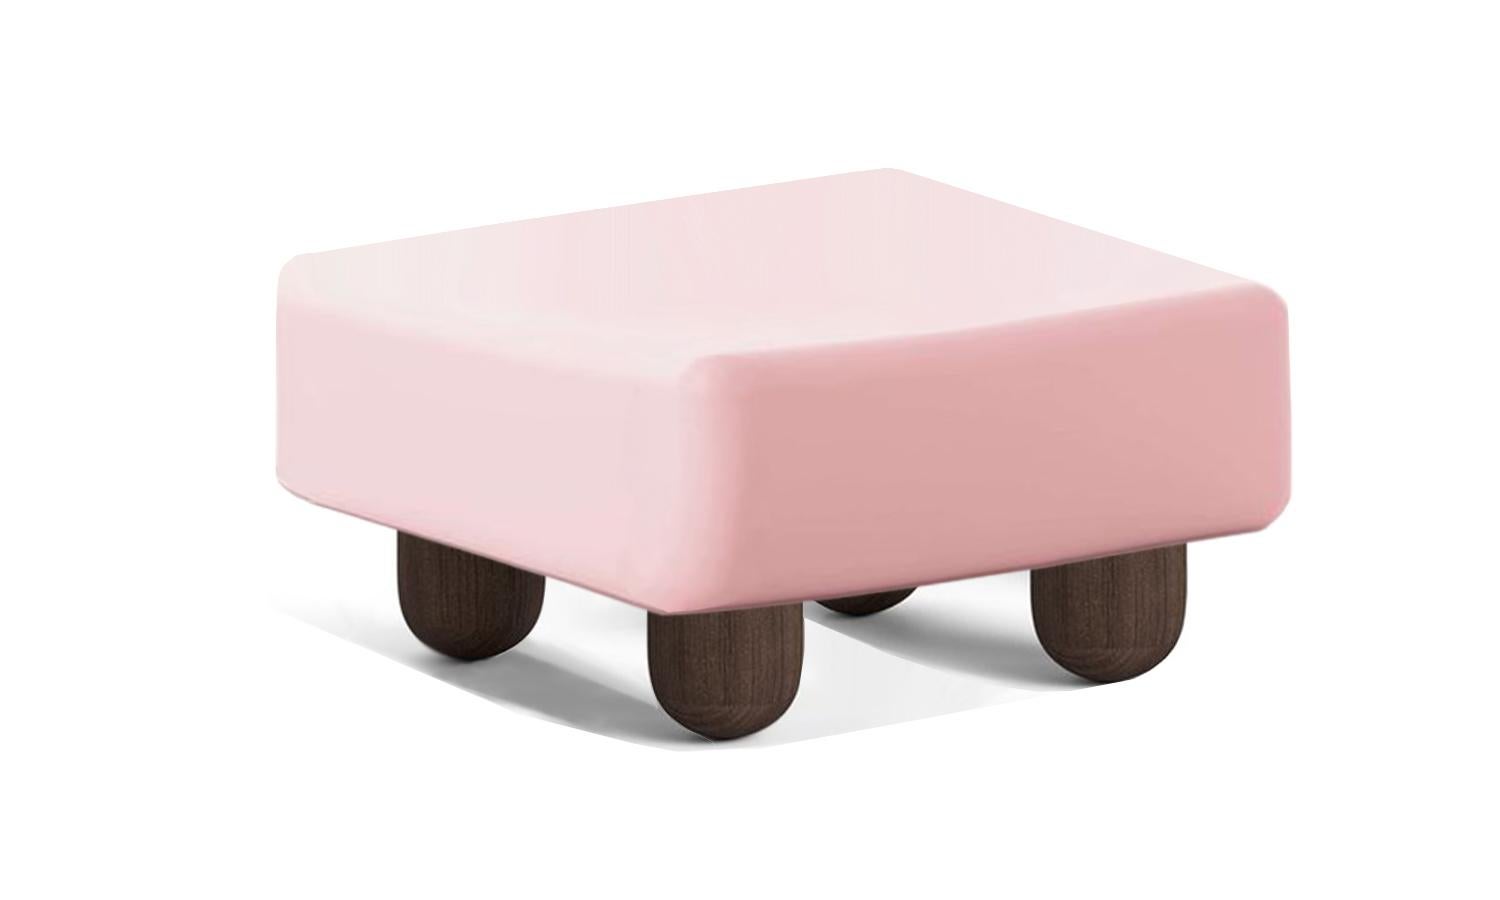 European Organic Modern Style Pink Lacquered Center Table Copenhagen Handcrafted For Sale